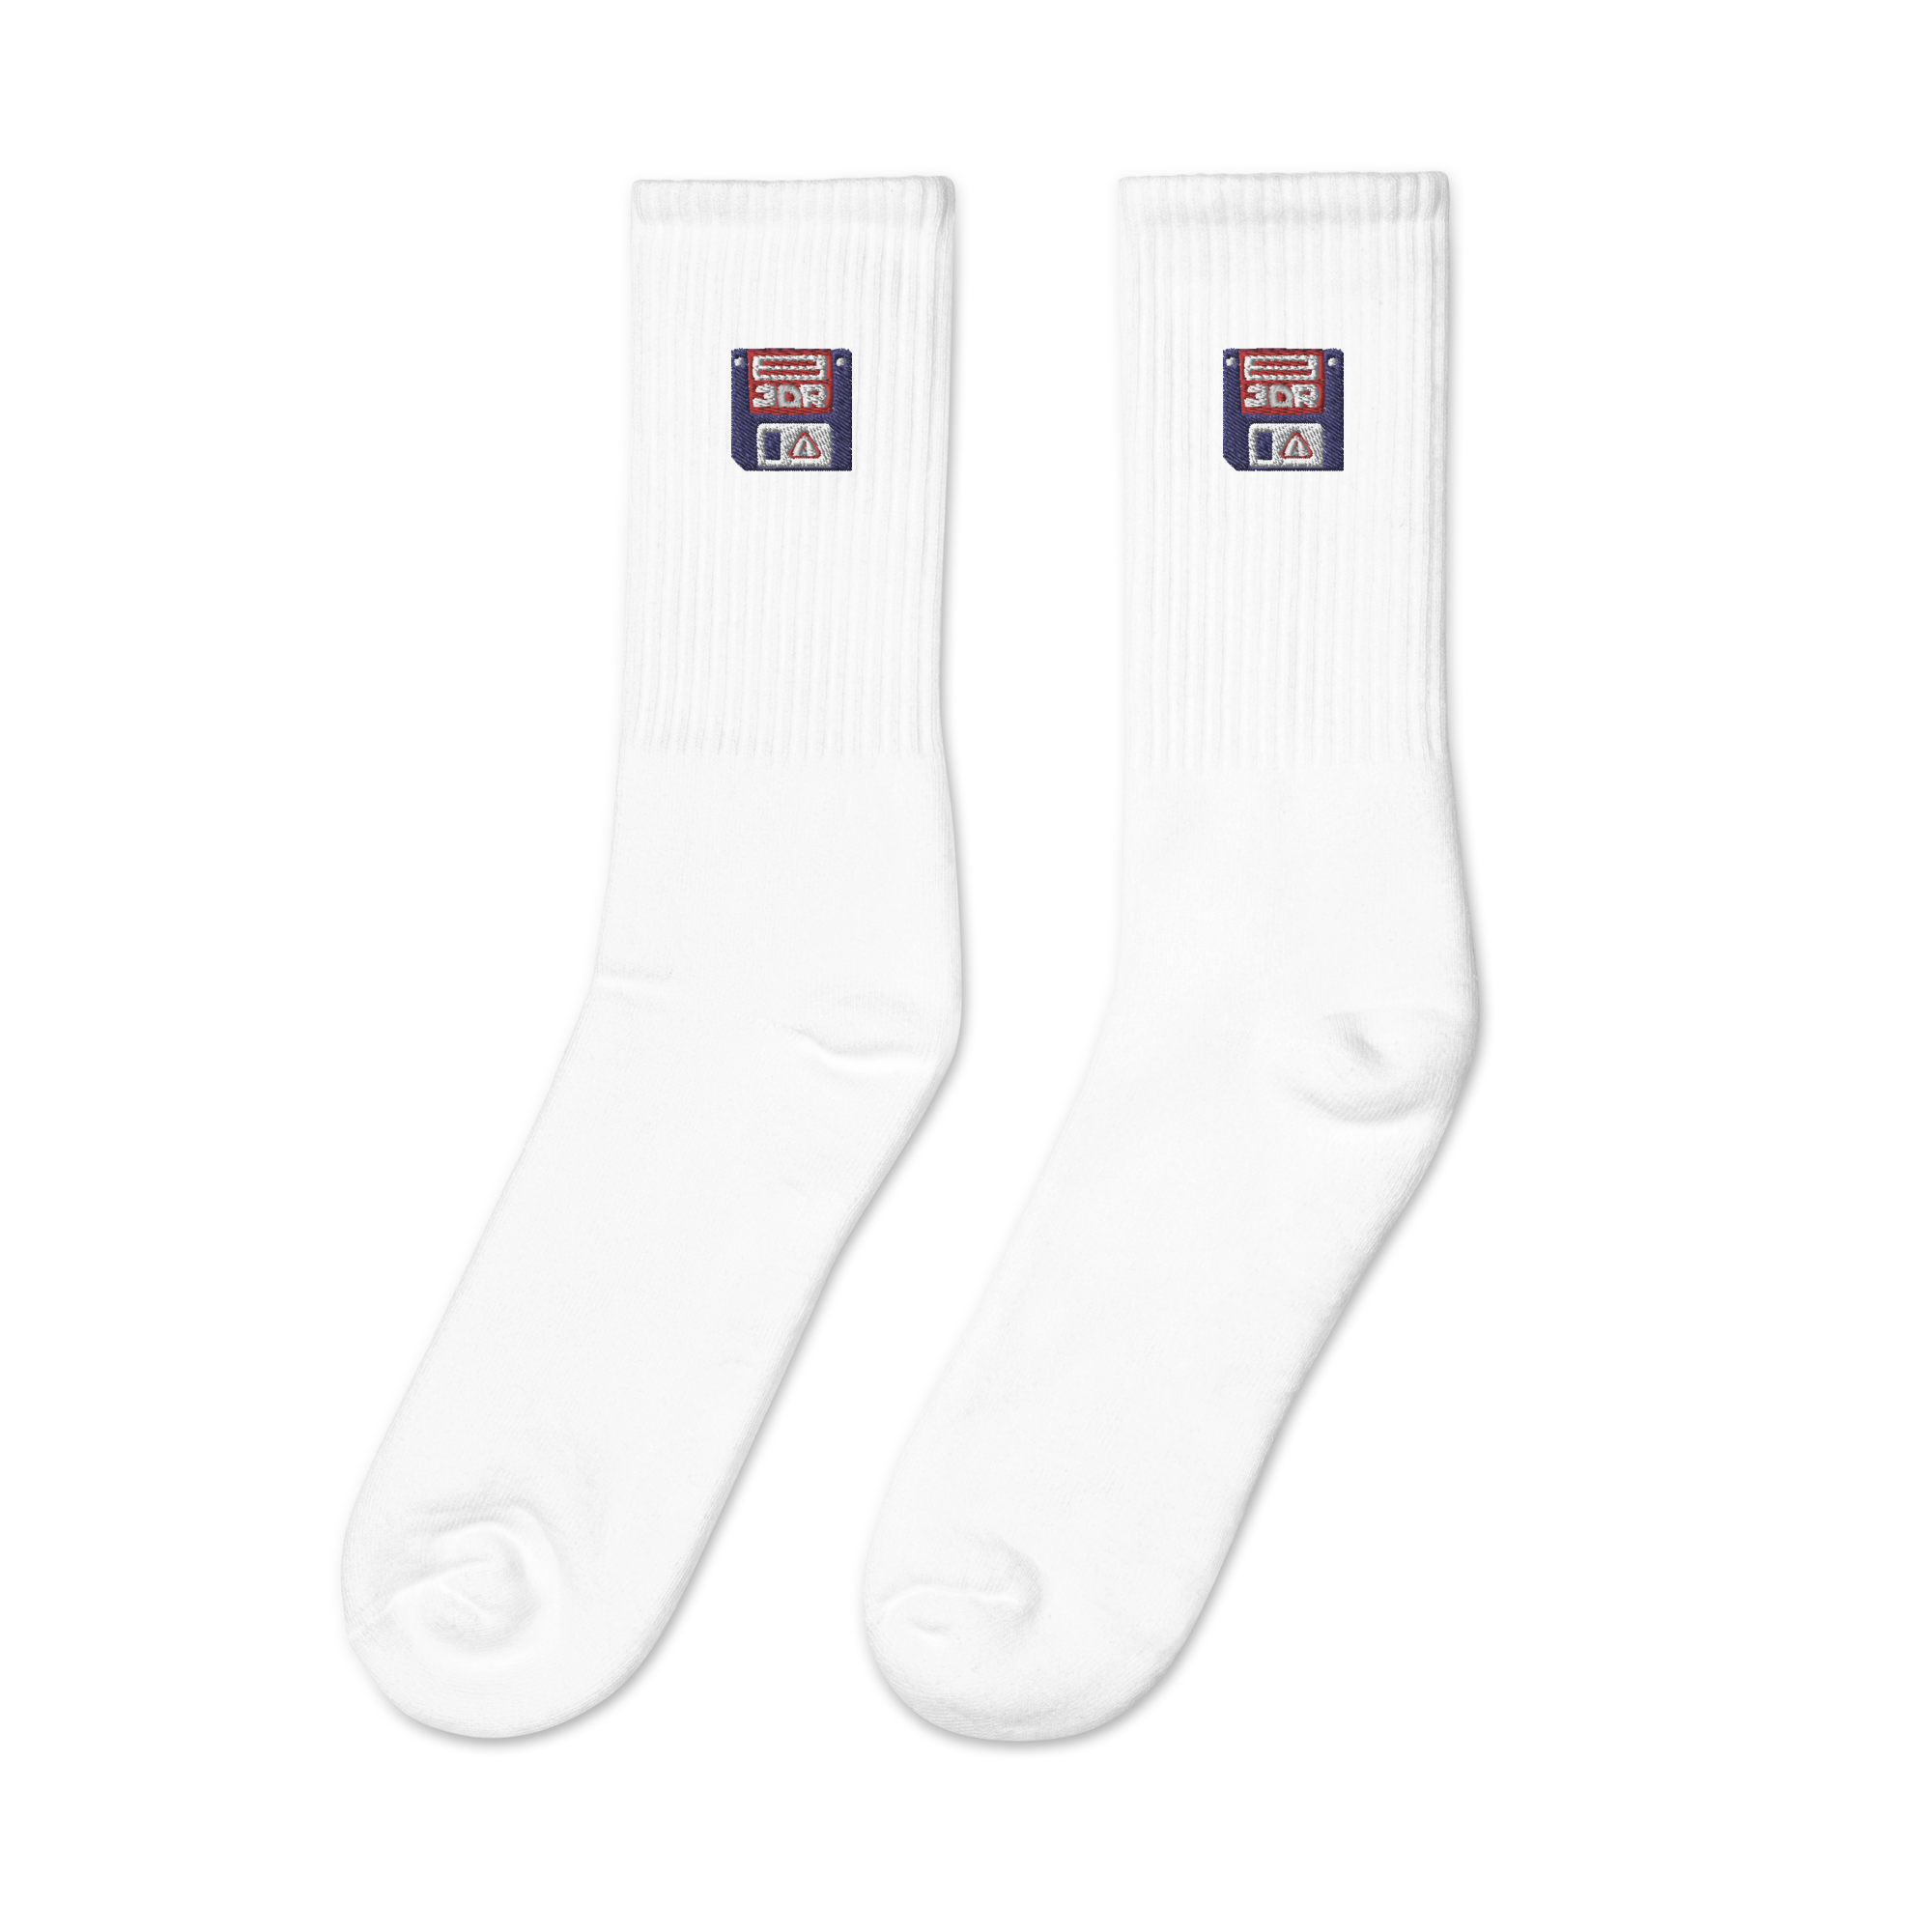 embroidered-crew-socks-white-left-6515b81d202ff.png